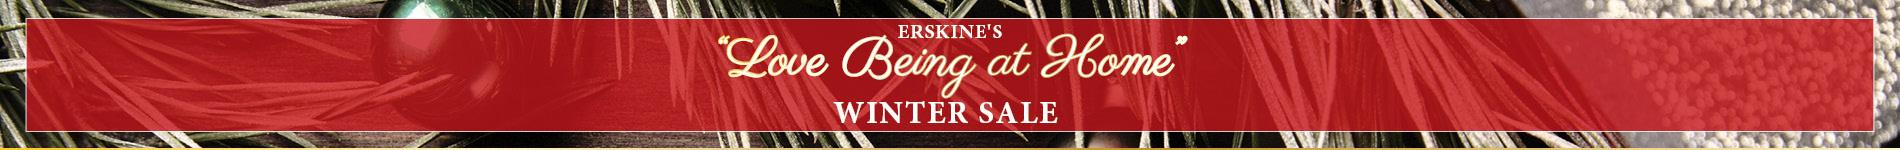 Love being at home winter sale going on now at Erskine's Interiors!